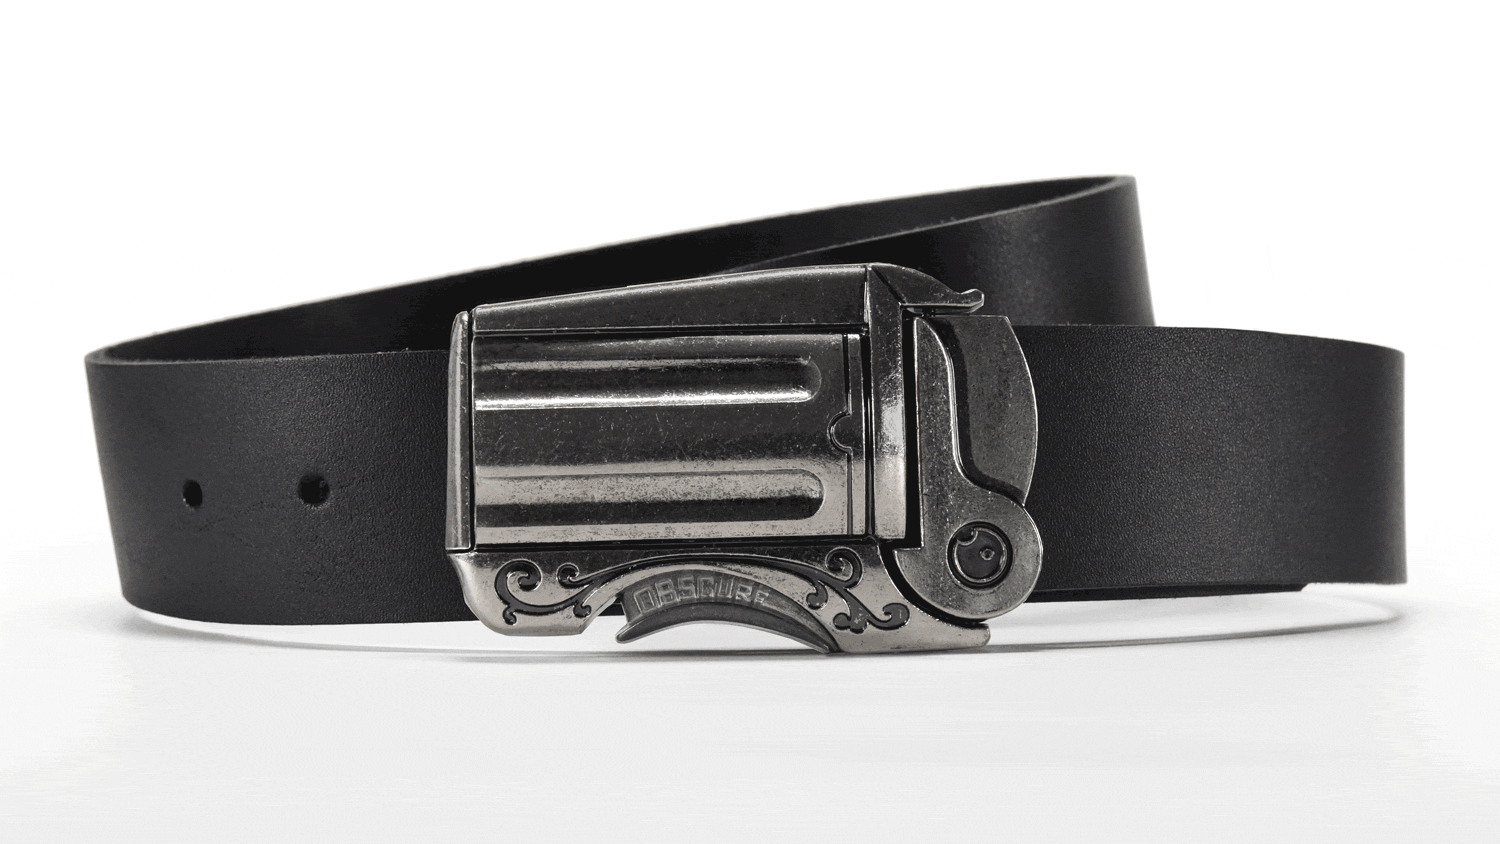 Top belts for men that must get a space in every man's wardrobe